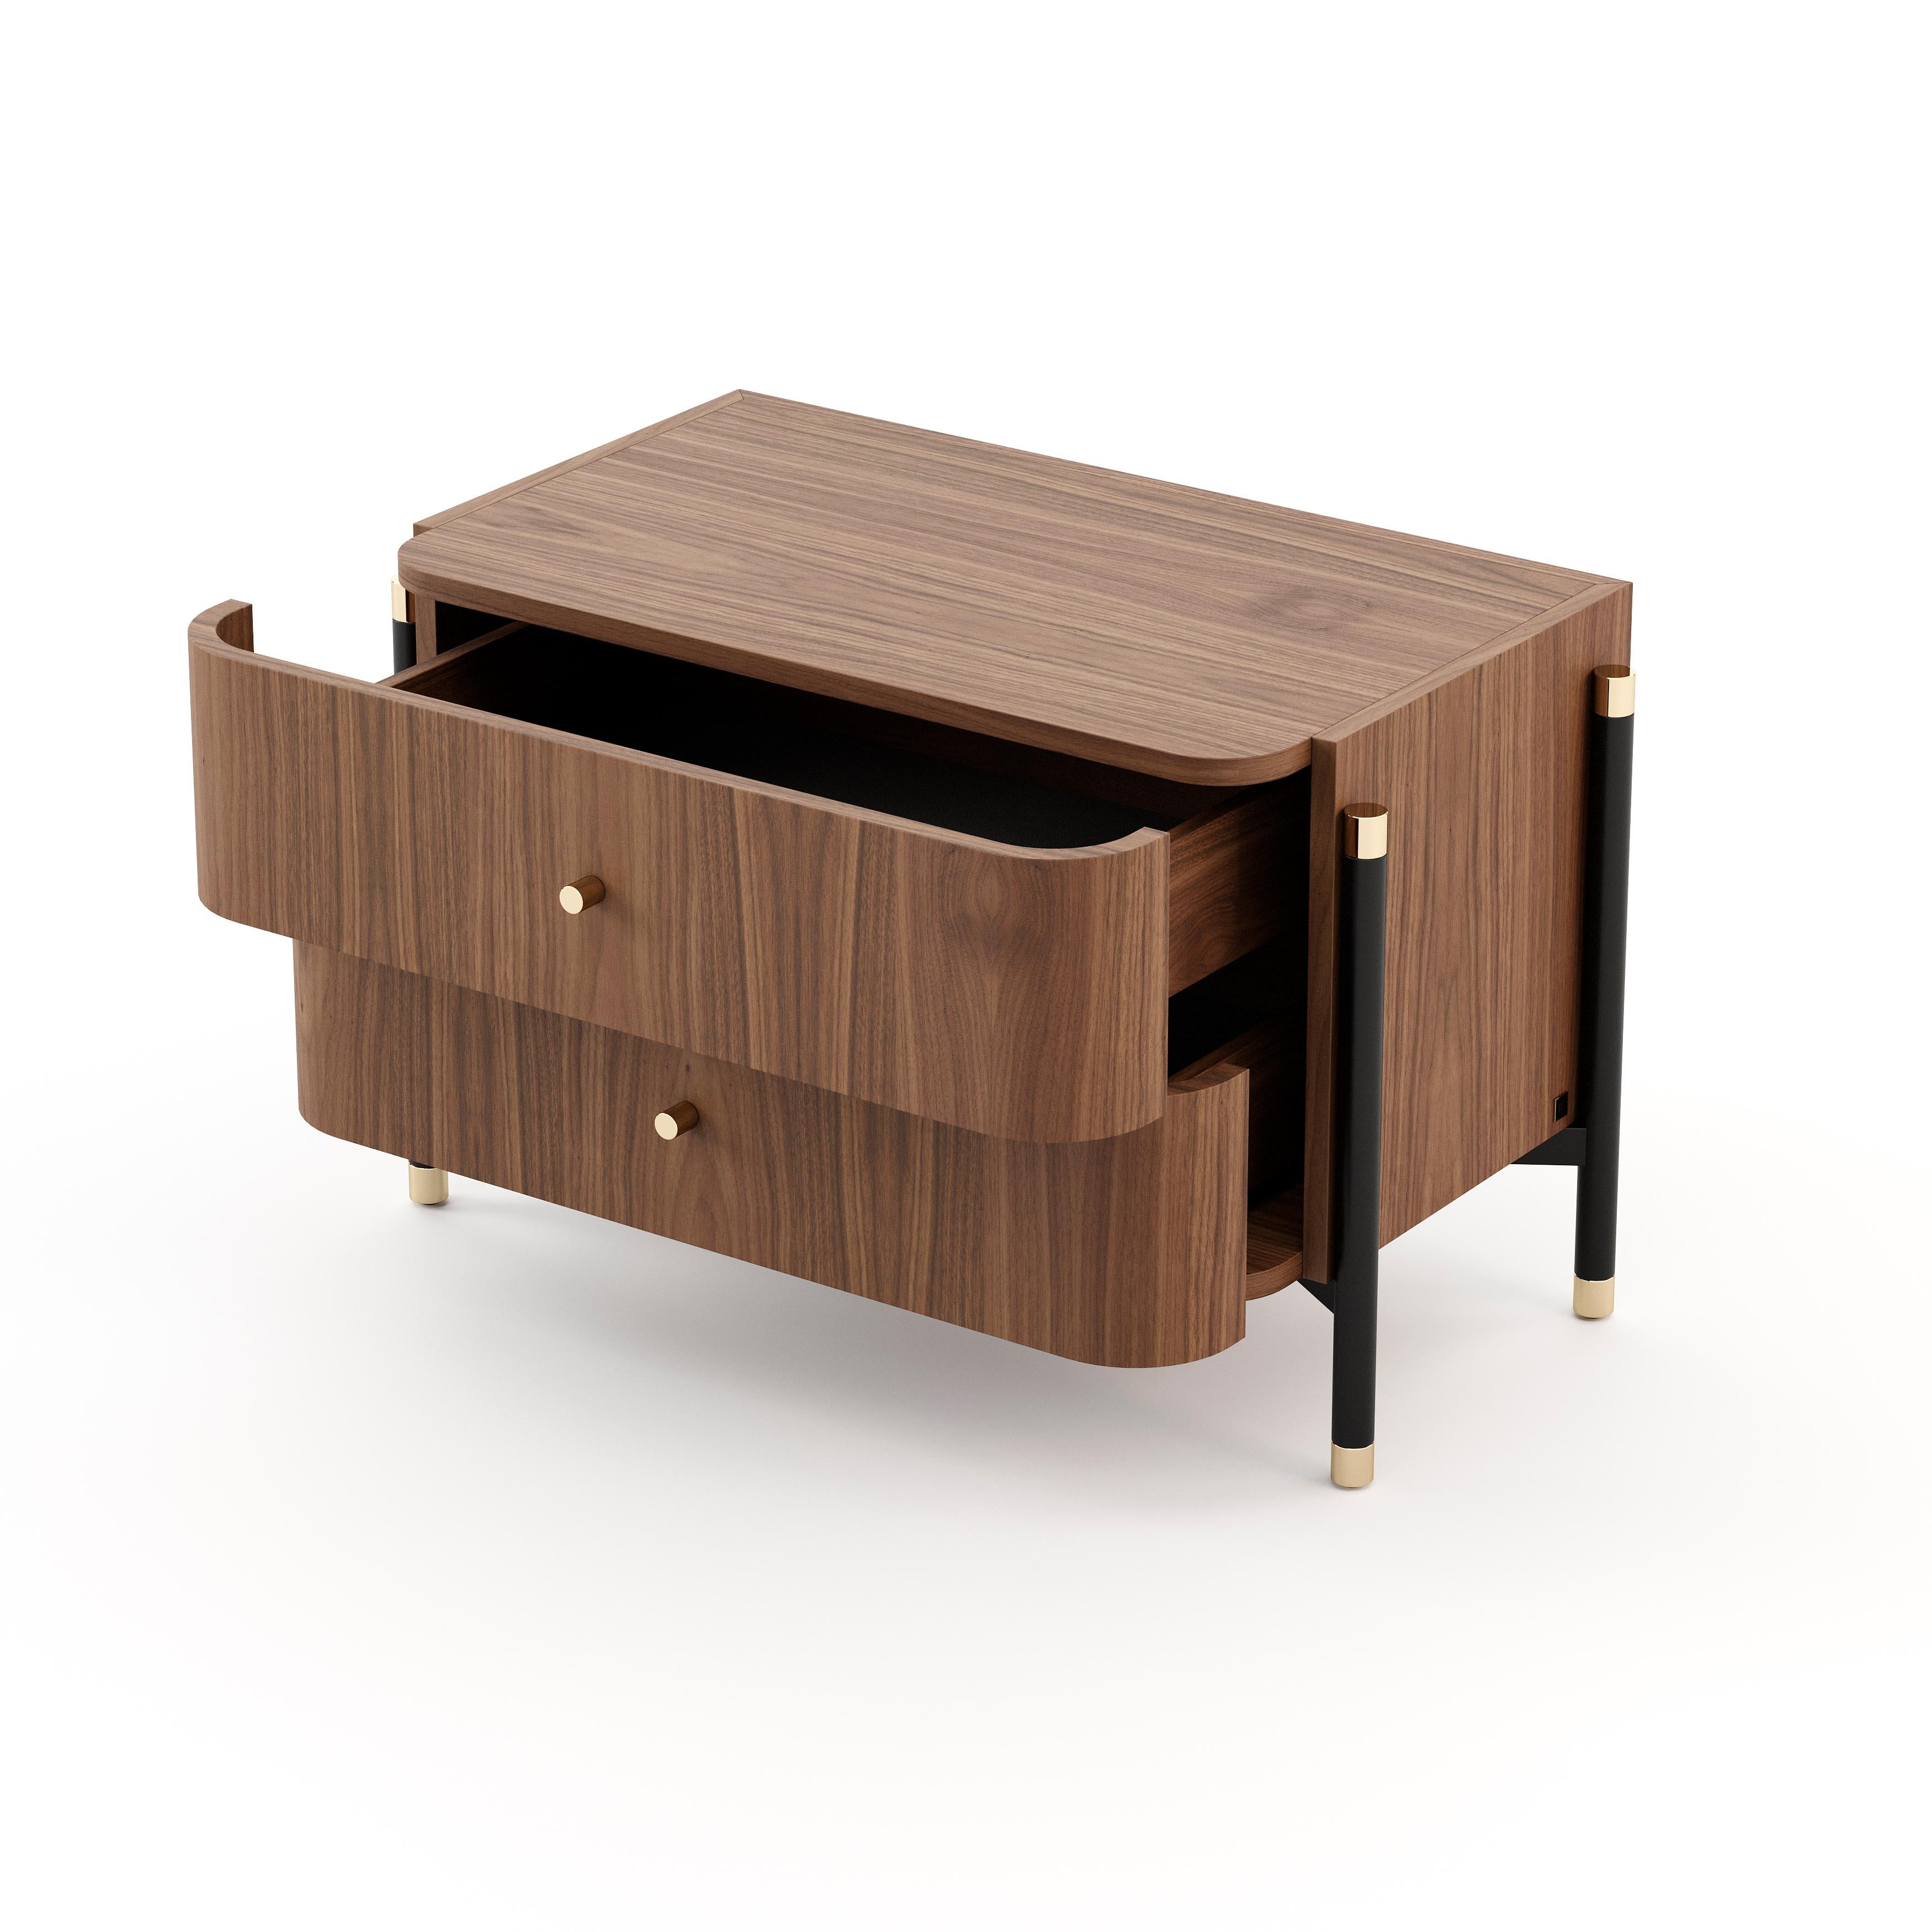 Hand-Crafted 21st-century Contemporary bedside table, finished in customisable wood veneer For Sale